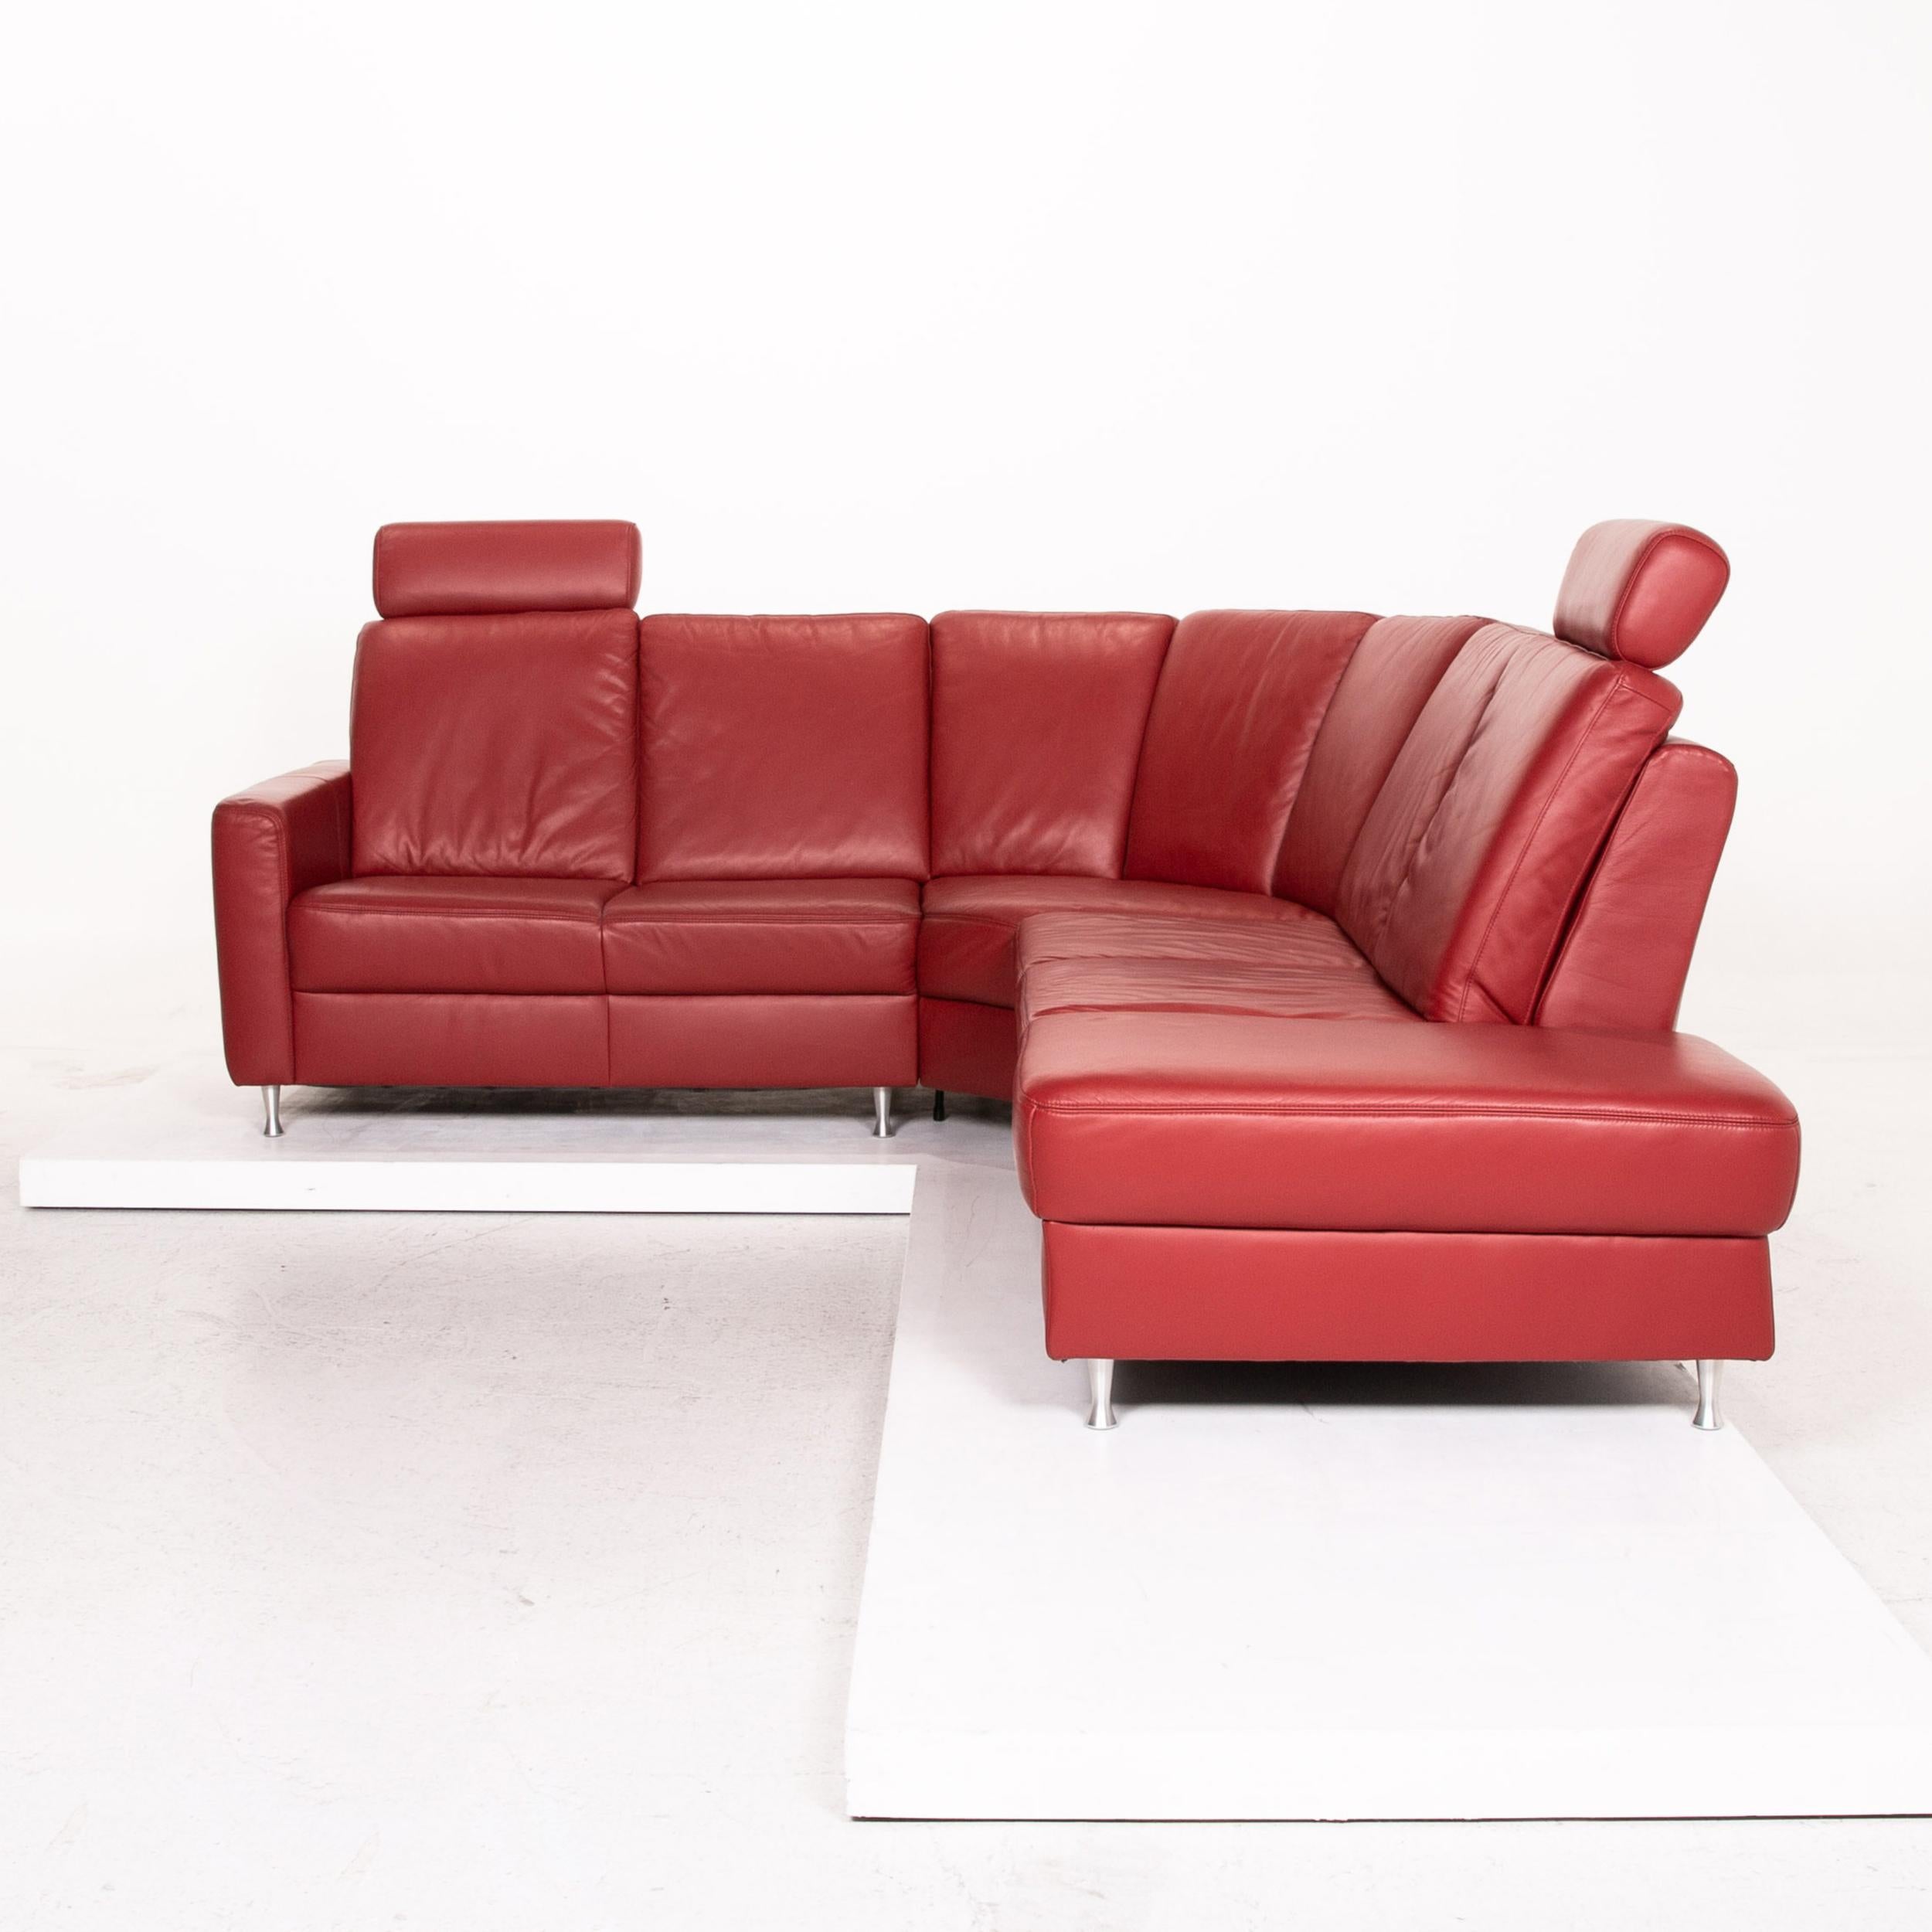 Sample Ring Leather Corner Sofa Red Dark Red Sofa Function Couch For Sale 6